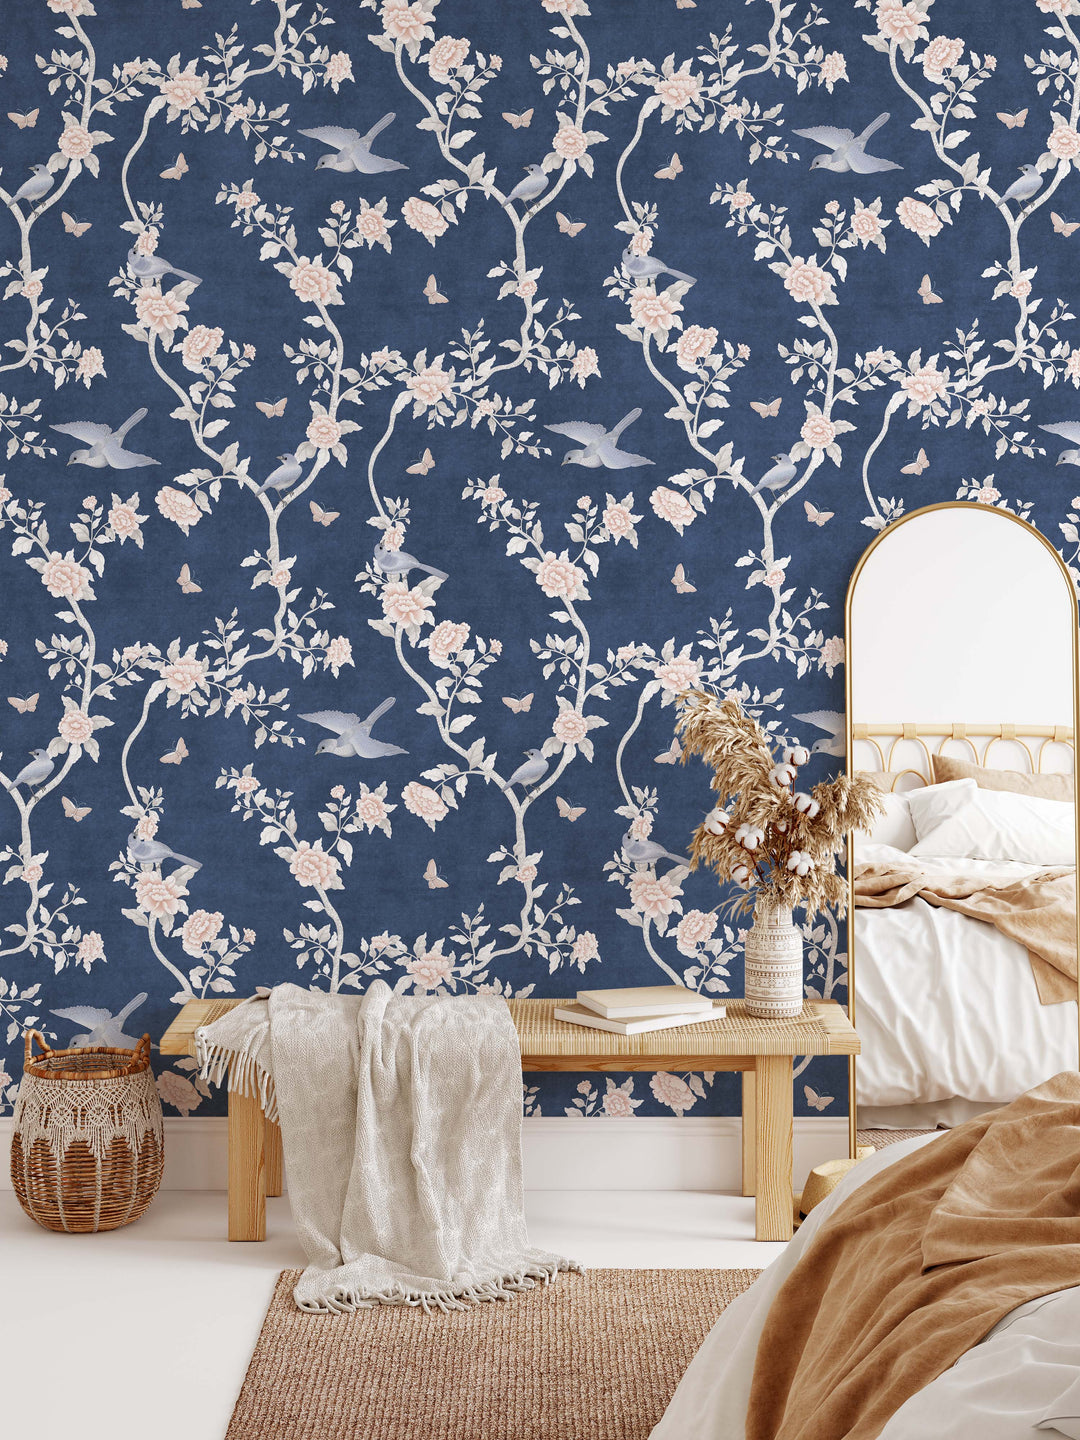 Le Tariche Chinoiserie Mural in Navy Blue